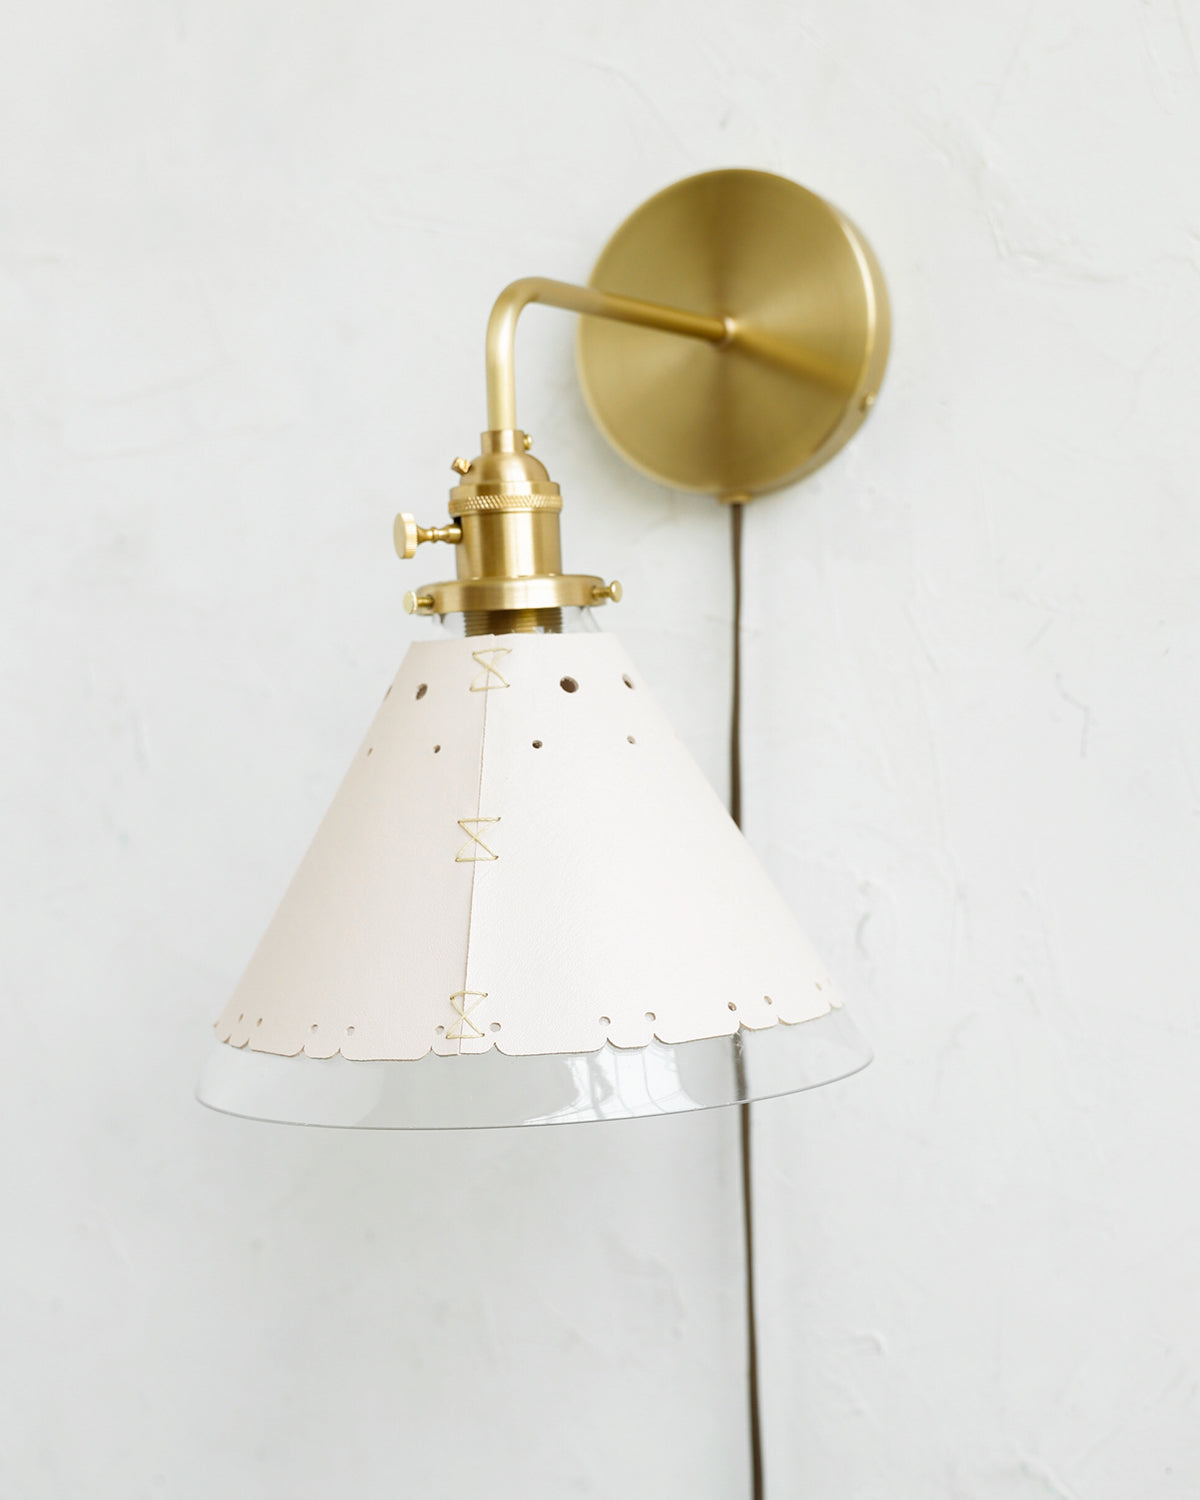 Classic satin brass plug in wall sconce with cone glass diffuser and decorative handstitched leather shade